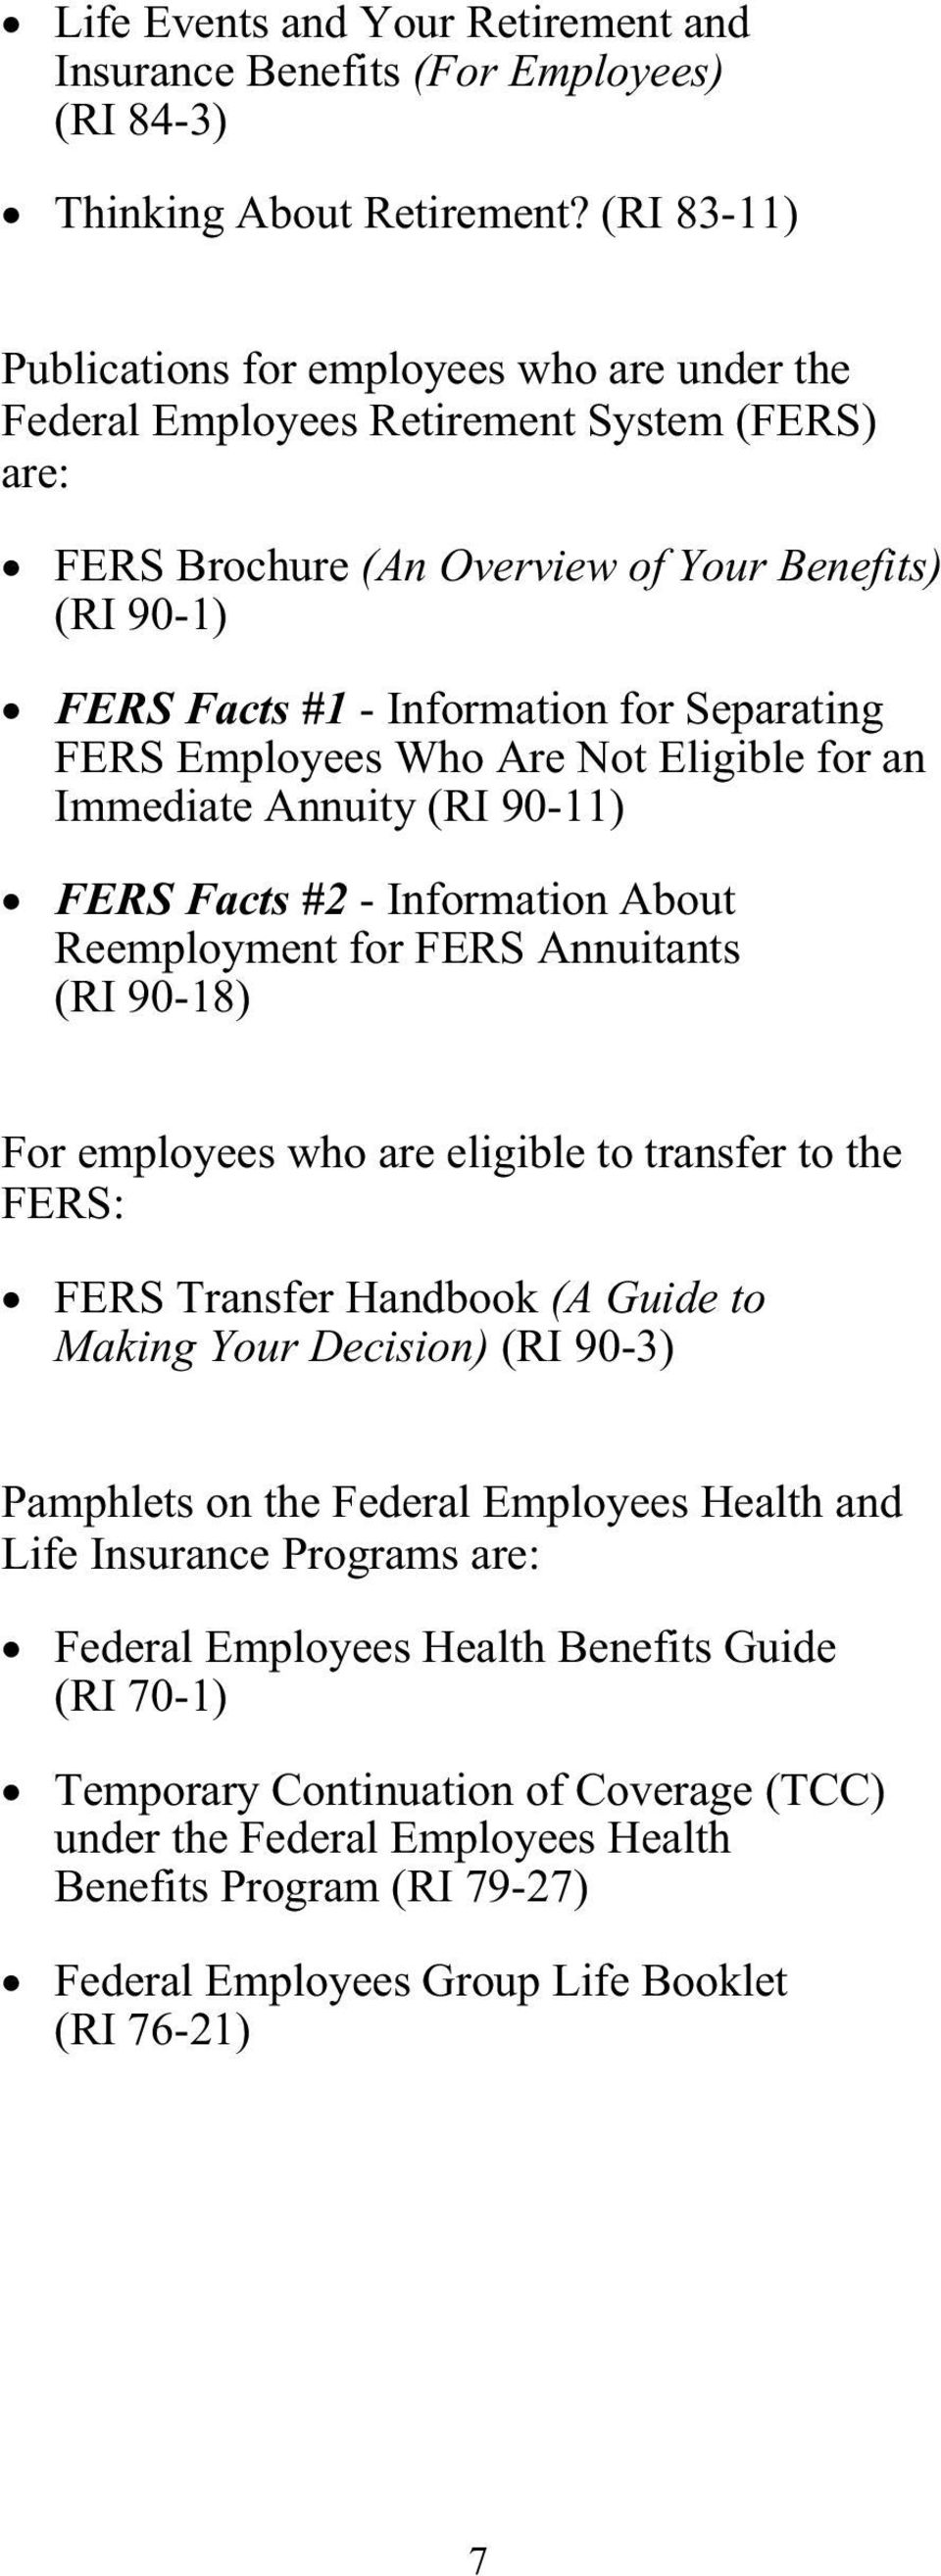 Separating FERS Employees Who Are Not Eligible for an Immediate Annuity (RI 90-11) FERS Facts #2 - Information About Reemployment for FERS Annuitants (RI 90-18) For employees who are eligible to